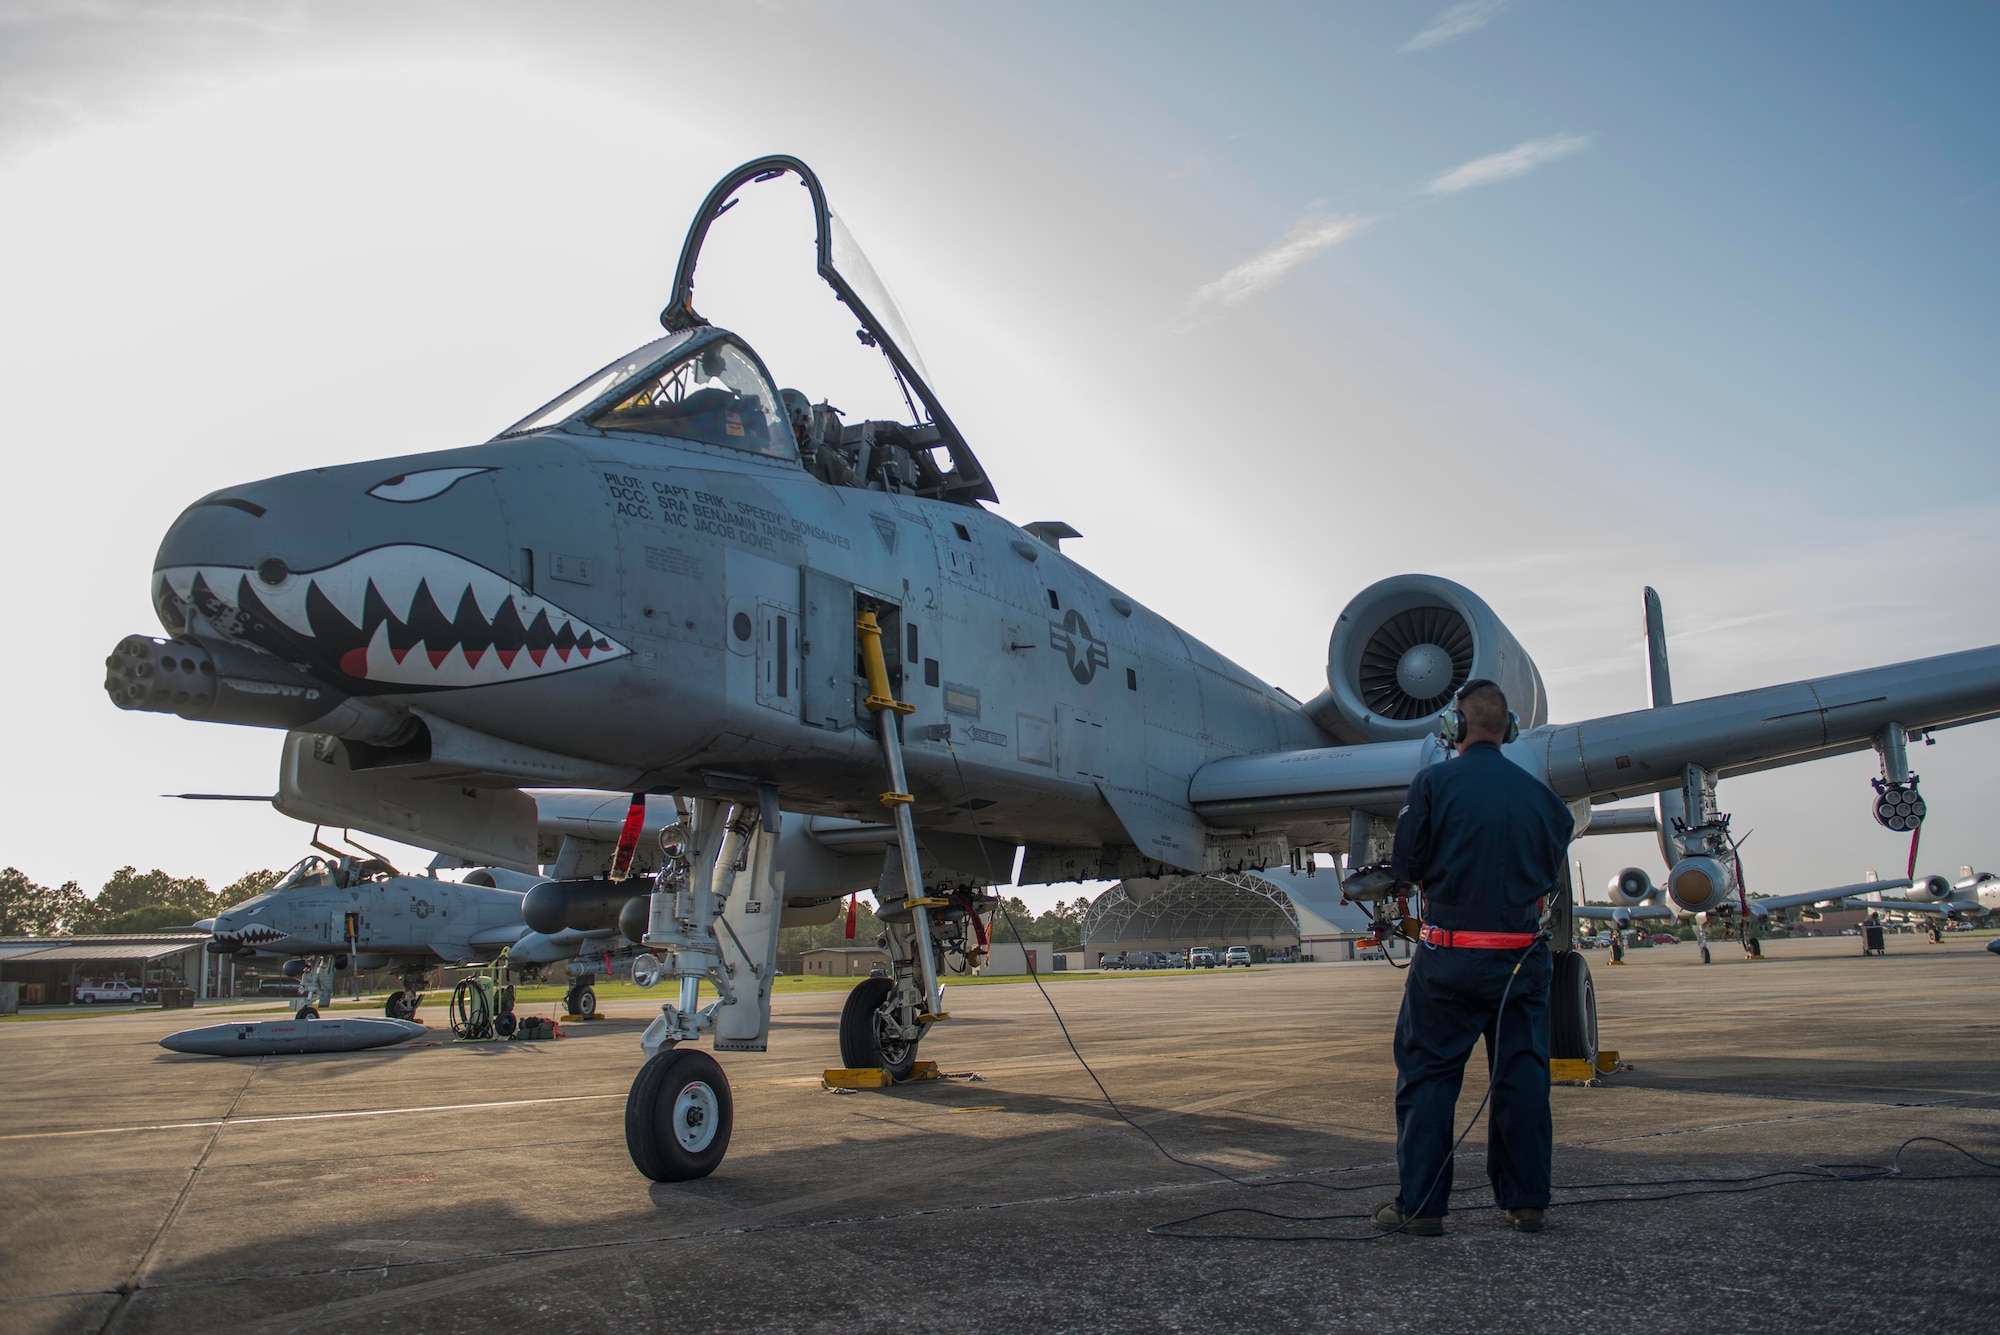 U.S. Air Force Airman 1st Class Jacob Dovel, 23d Aircraft Maintenance Squadron crew chief, coordinates with Capt. Bass Farmer, 75th Fighter Squadron A-10C Thunderbolt II pilot, on pre-flight checks before takeoff during Exercise DRAGON STRIKE June 11, 2015, at Avon Park Air Force Range, Fla. The 23d AMXS provided maintenance for all ten of Moody Air Force Base’s A-10s participating in joint terminal attack controller exercises. (U.S. Air Force photo by Airman 1st Class Dillian Bamman/Released)